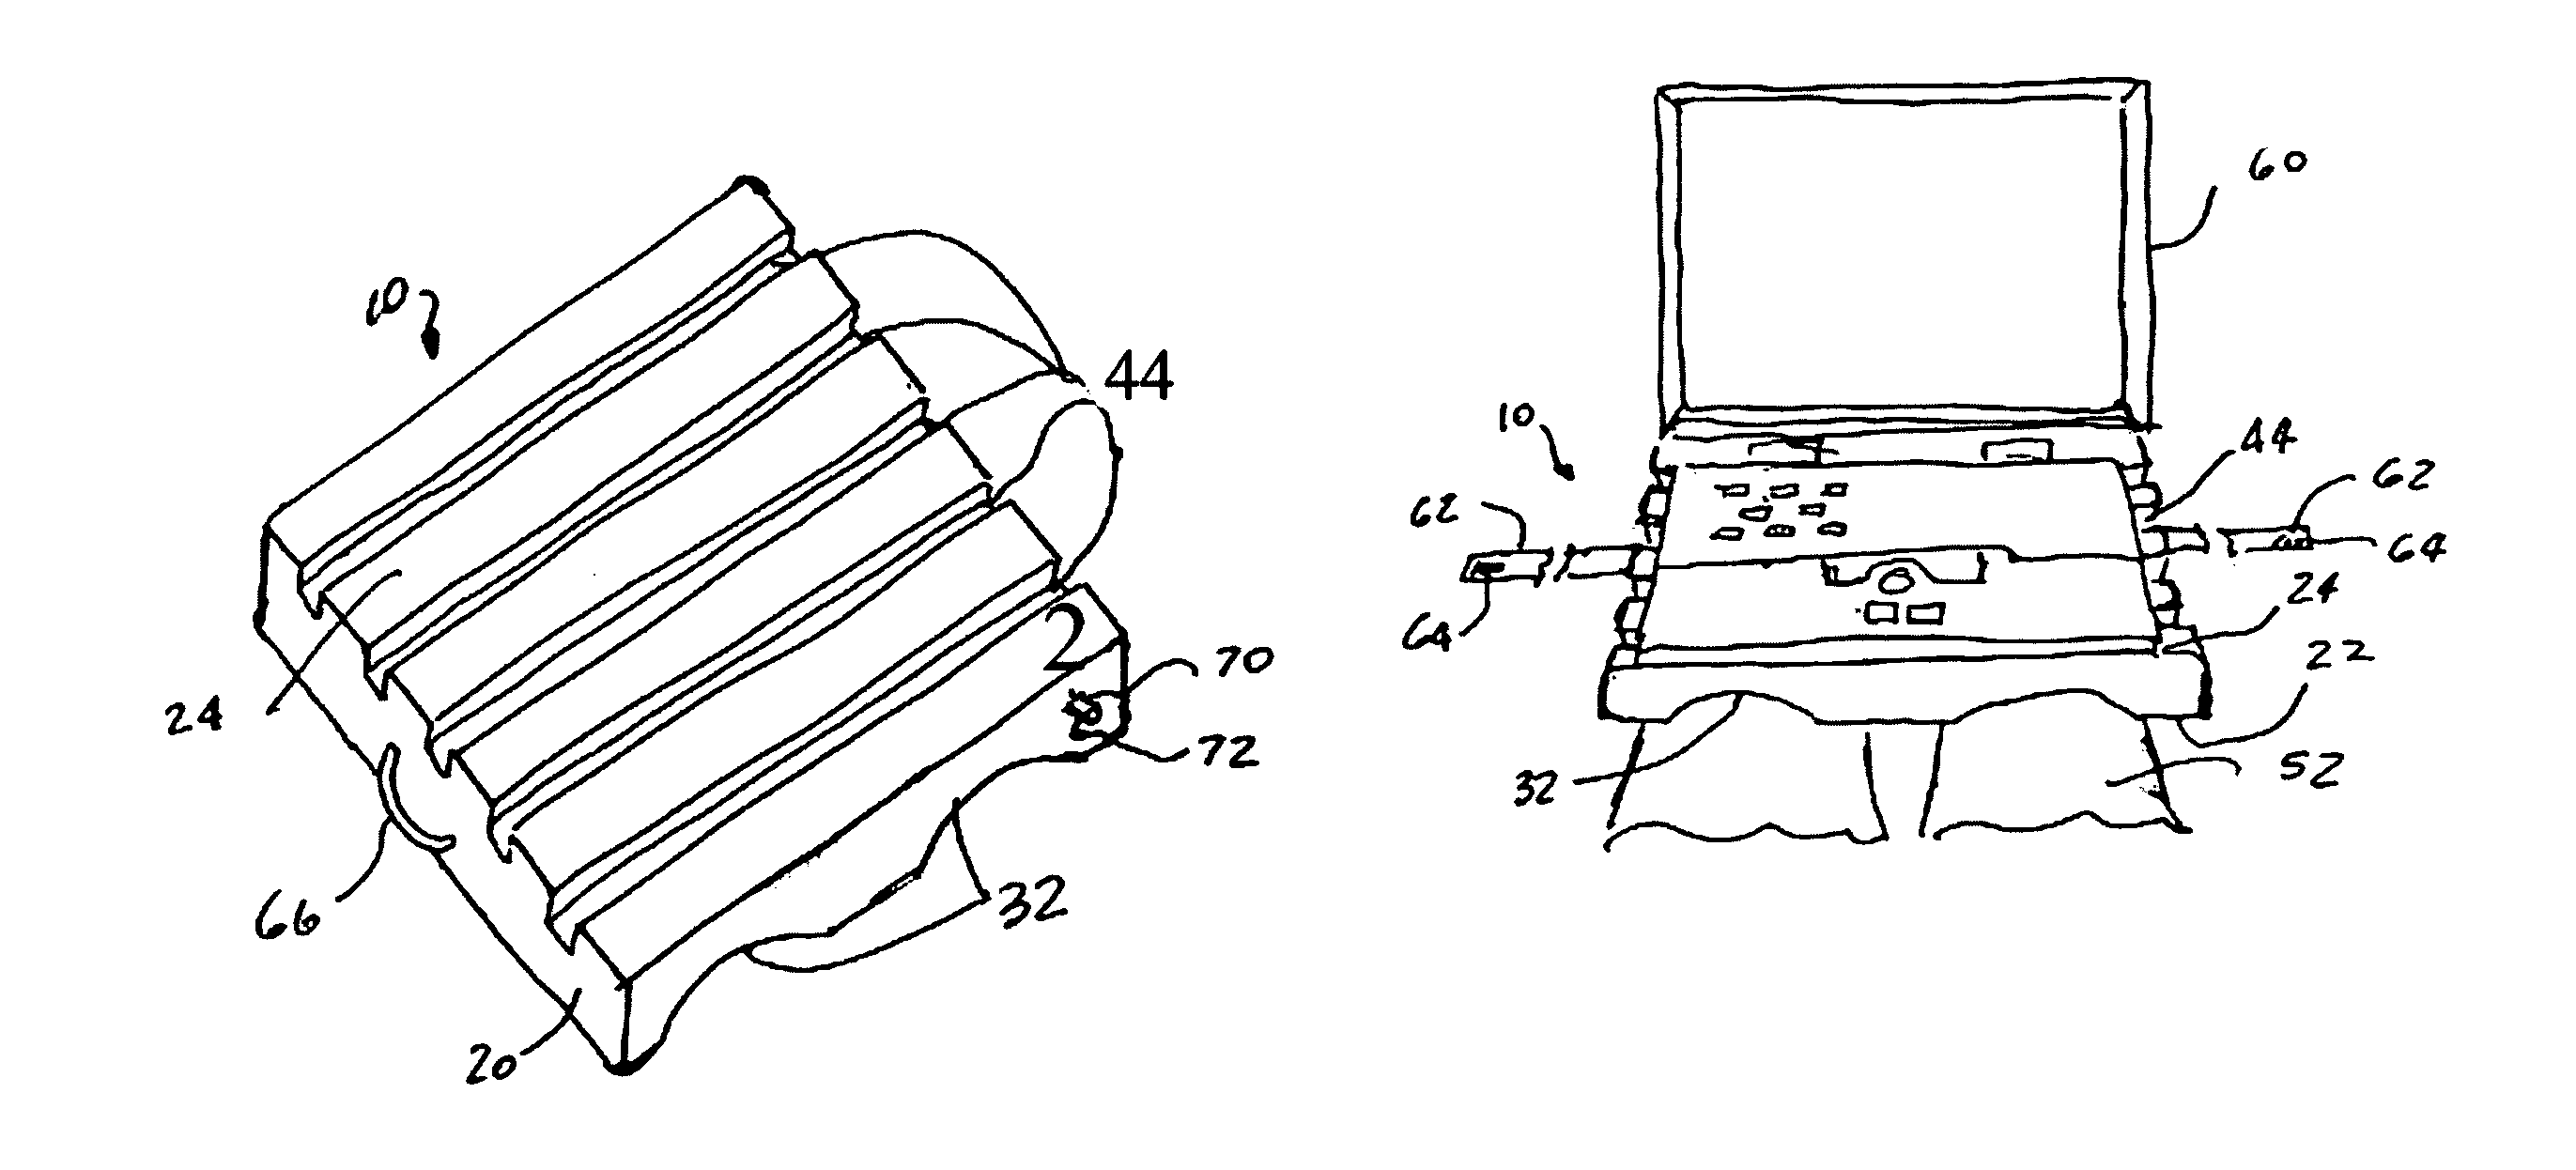 Combination notebook computer support and cushion